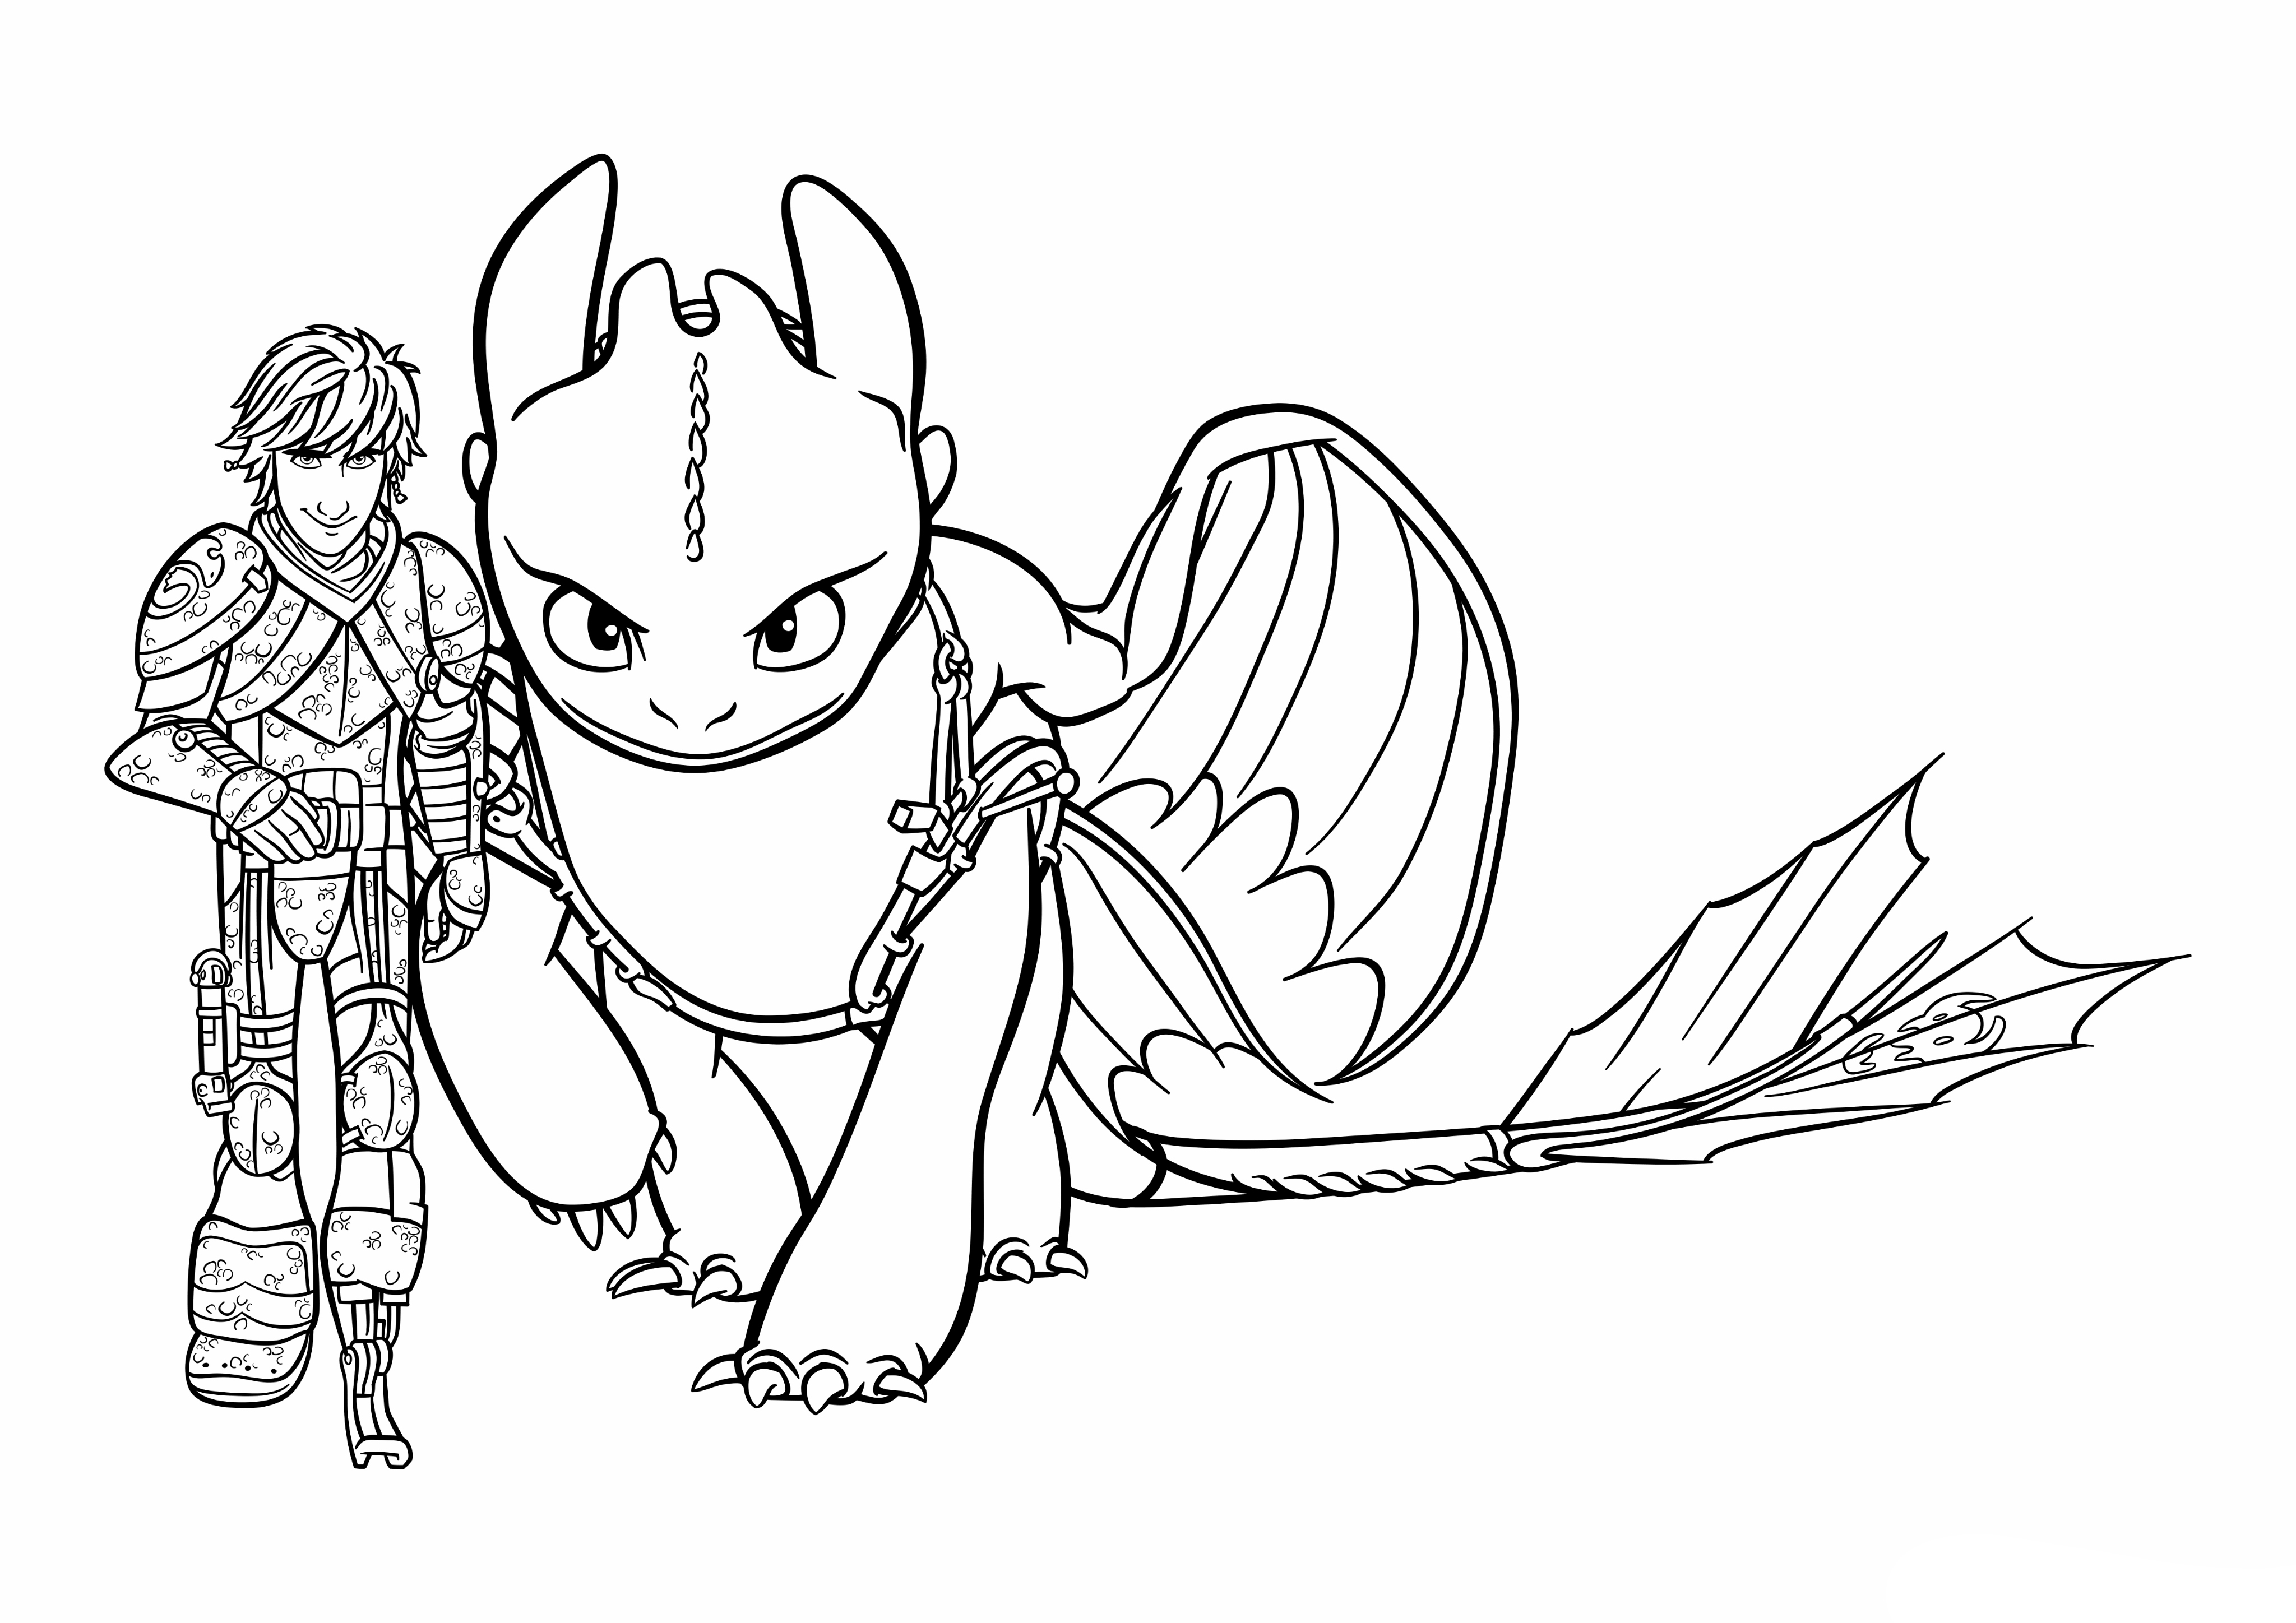 Coloring Pages How to Train Your Dragon 3 | Print for free